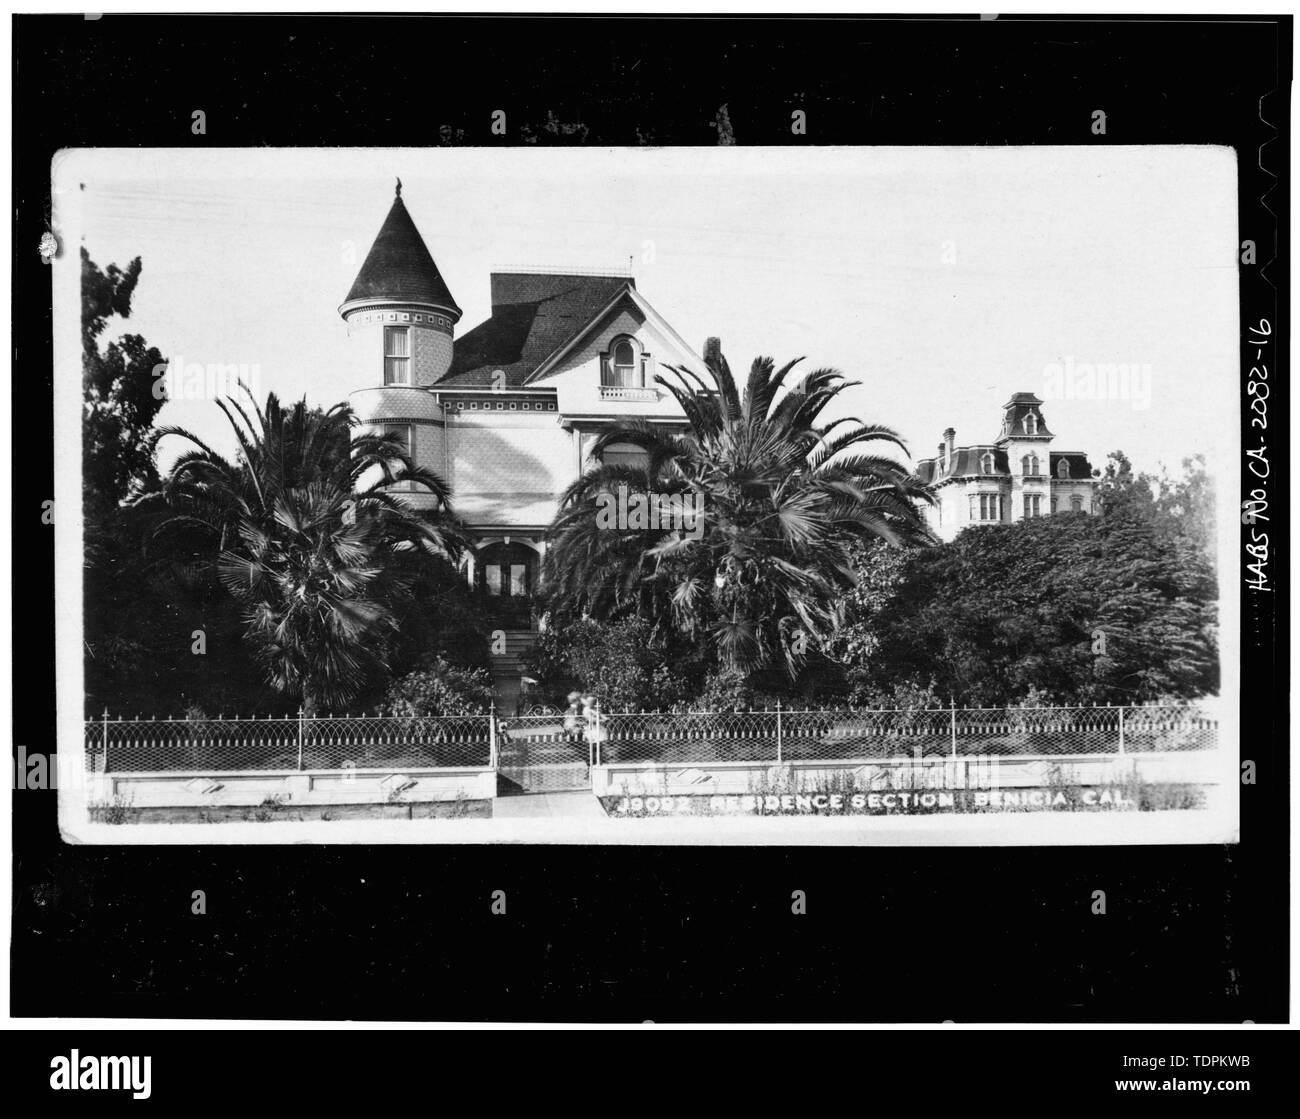 Photocopy of postcard (from Ardella Fish Shanks) Frank Stumm, photographer ca. 1908-16 SOUTH FRONT, HASTINGS HOUSE IN BACKGROUND - Riddell Fish House, 245 West K Street, Benicia, Solano County, CA Stock Photo